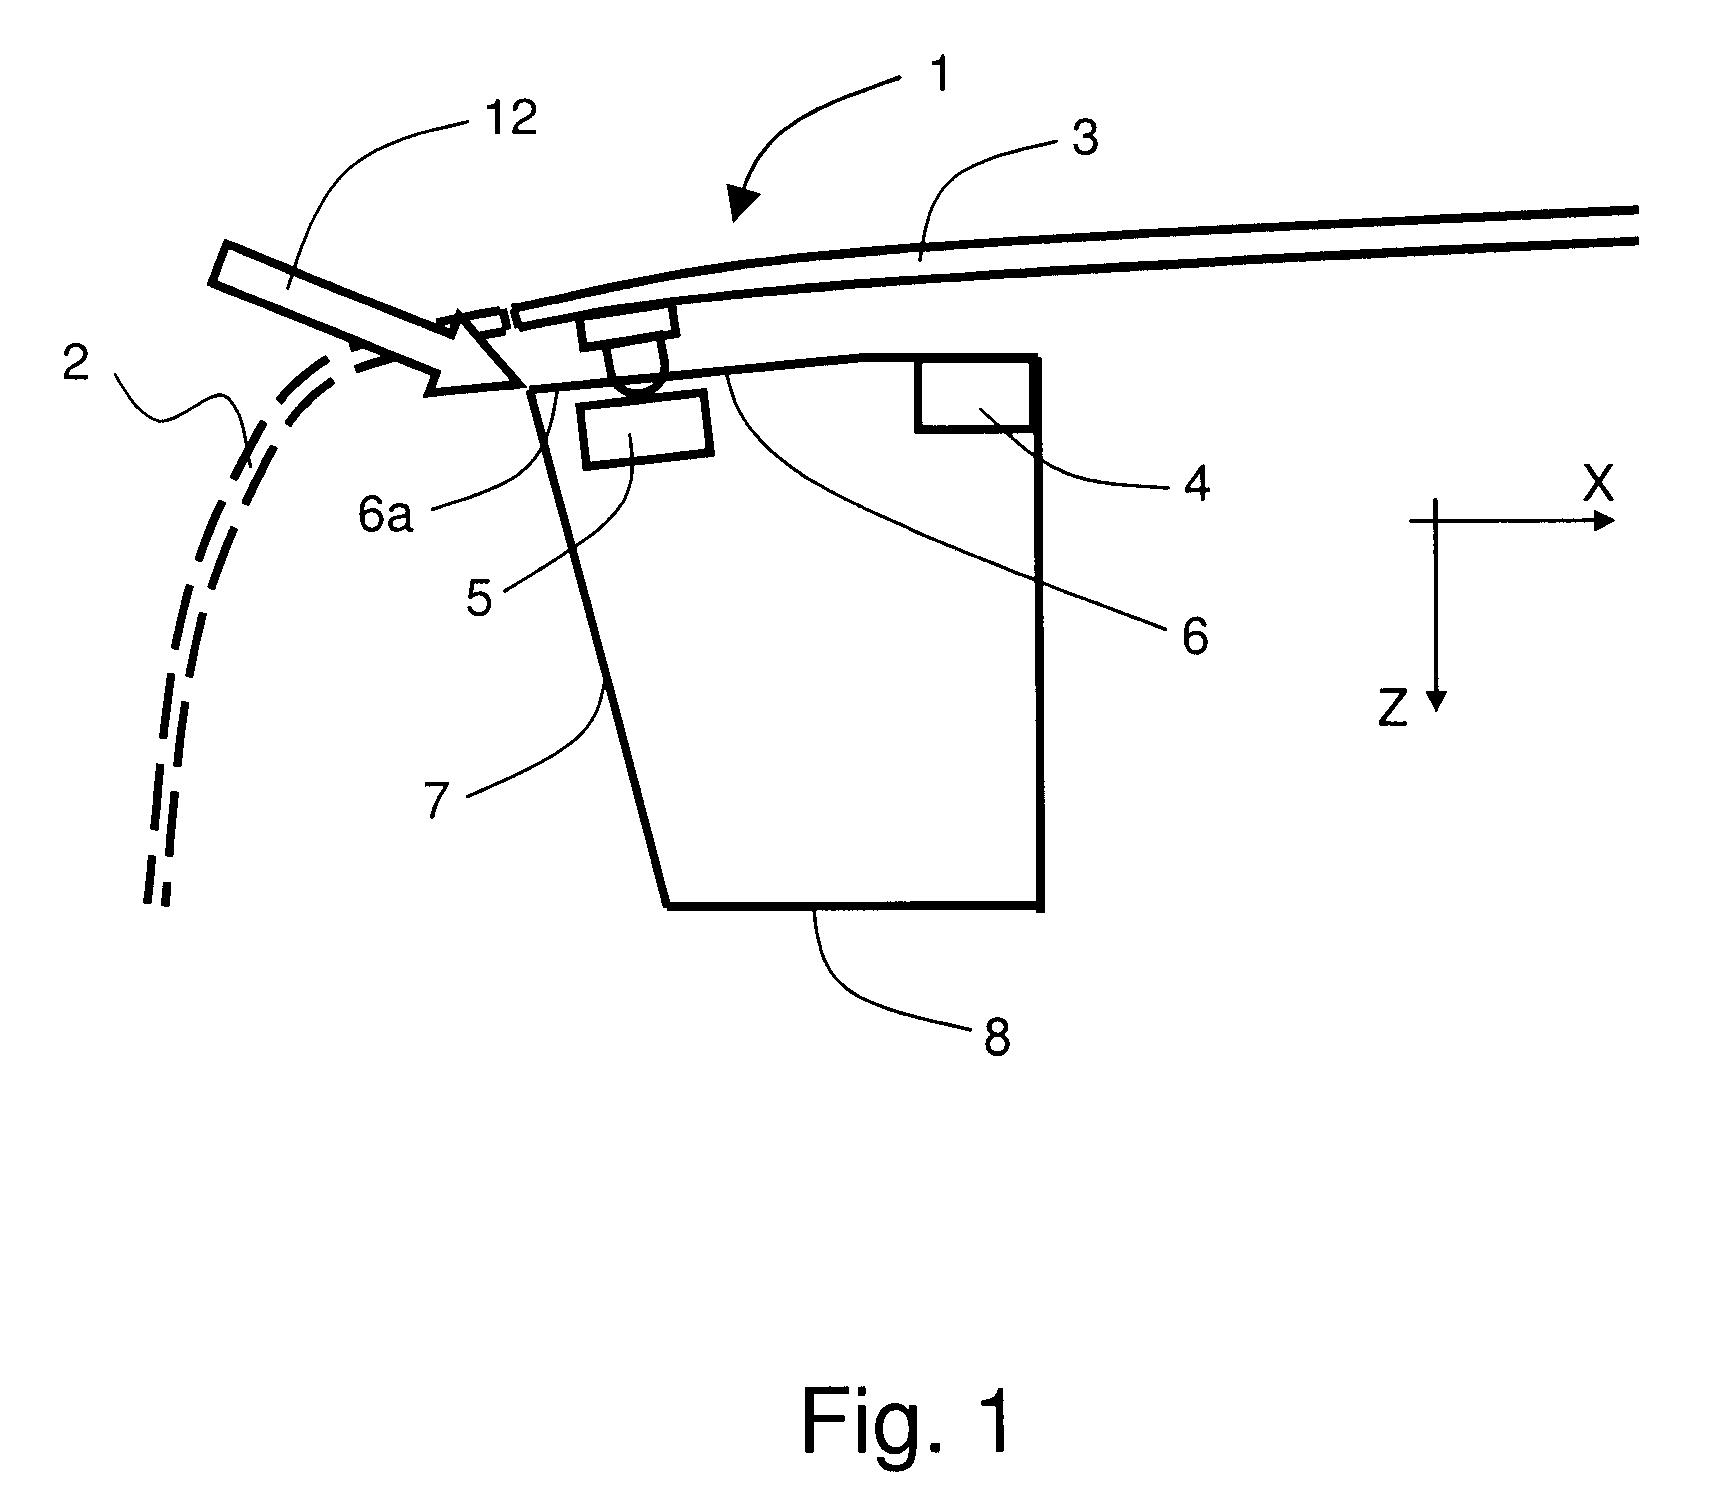 Engine compartment hood latch structure for a motor vehicle